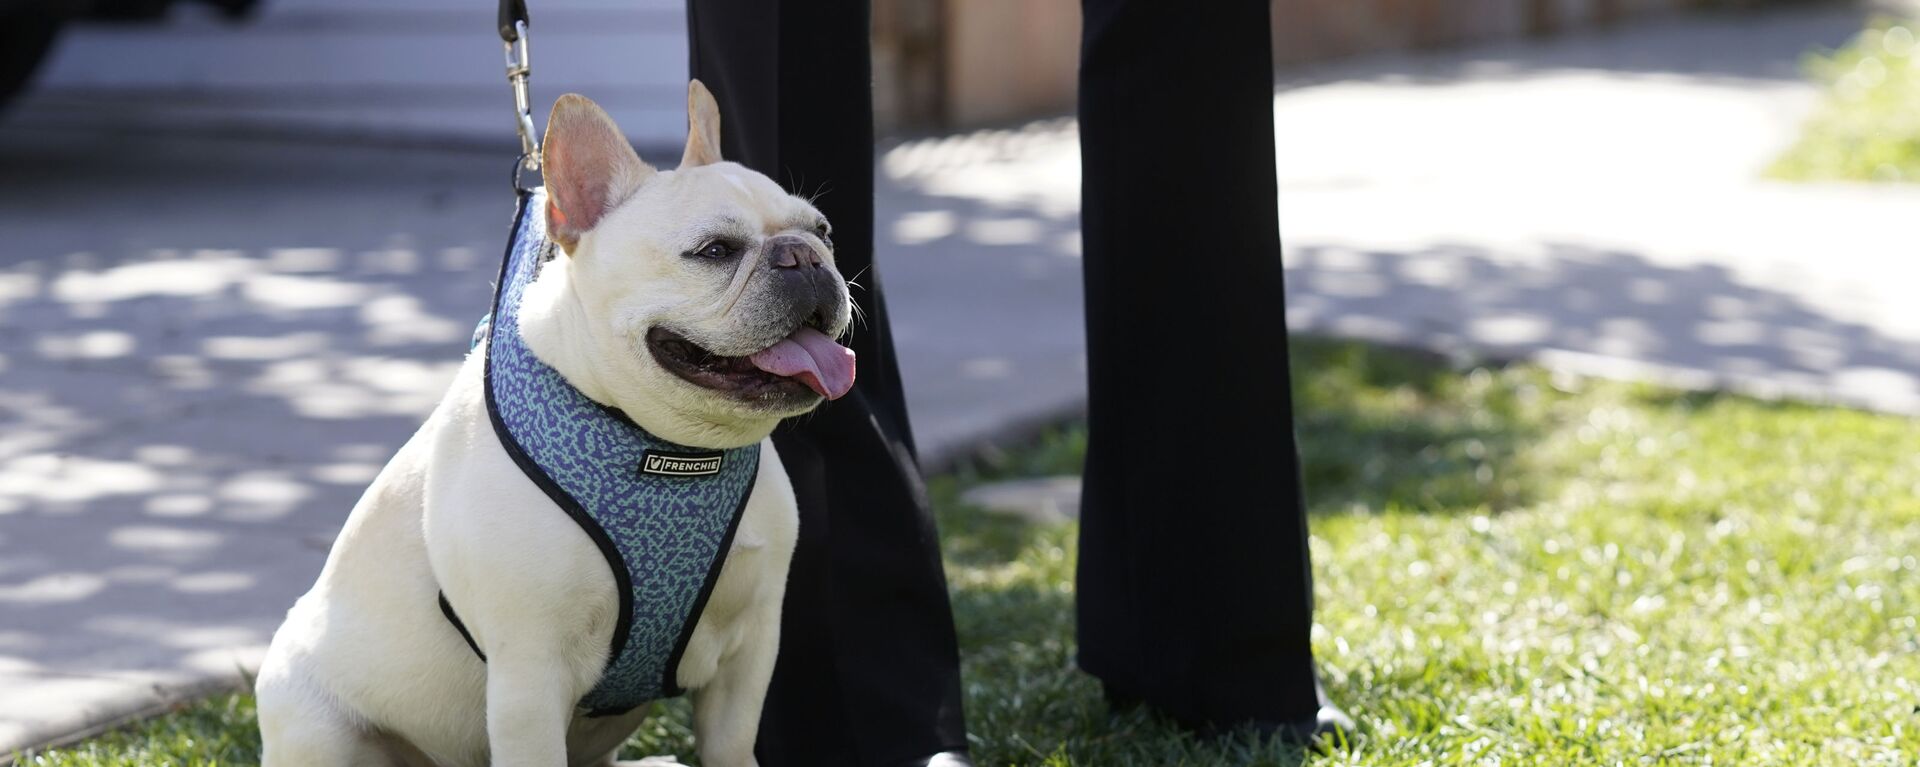 A French bulldog sits near an area on North Sierra Bonita Ave. where Lady Gaga's dog walker was shot and two of her French bulldogs stolen, Thursday, Feb. 25, 2021, in Los Angeles. - Sputnik International, 1920, 06.12.2022